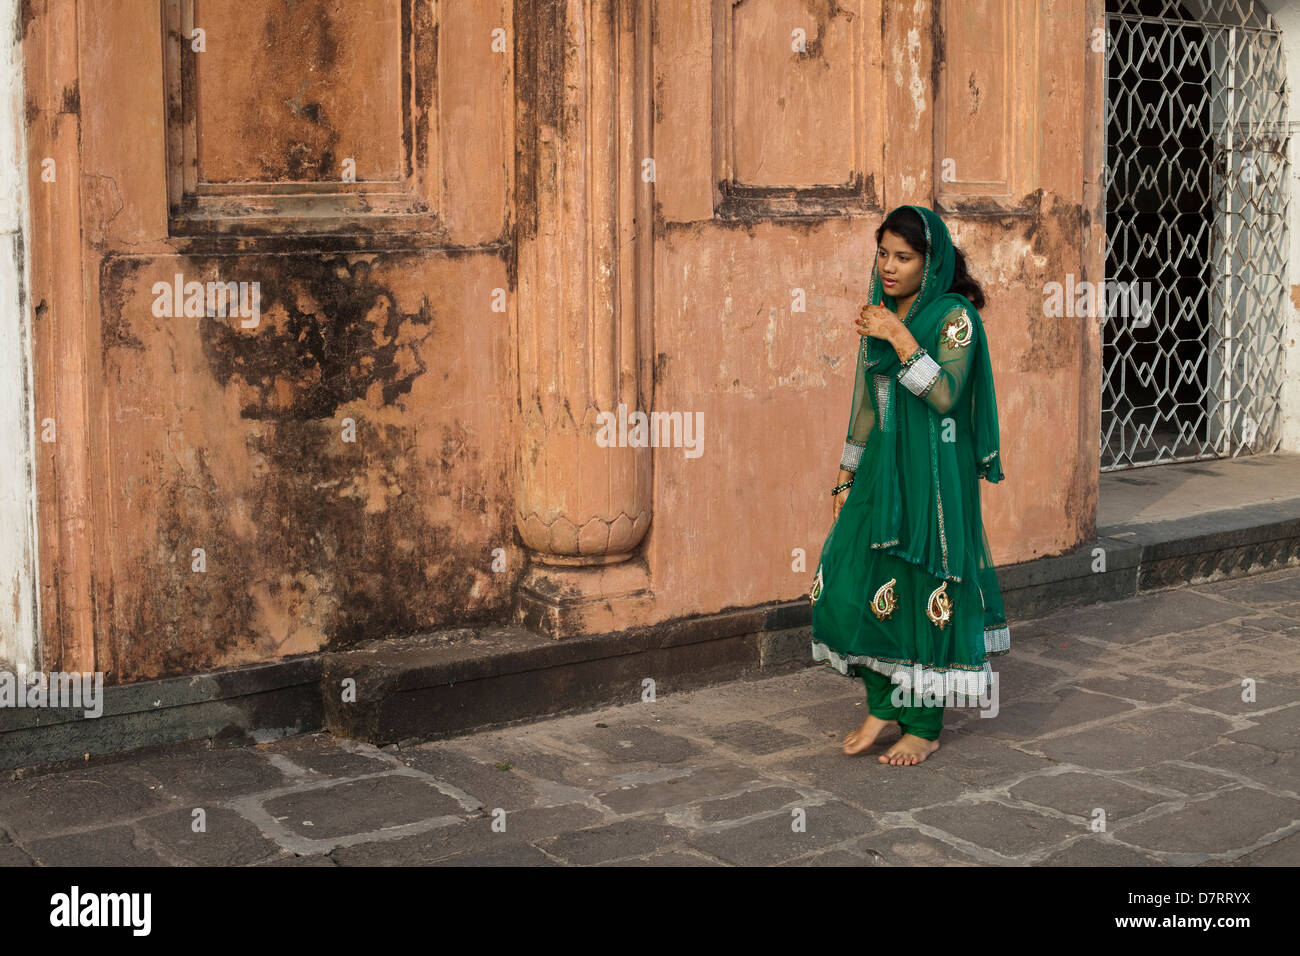 A young Muslim woman walks past the Tomb of Bibi Pari in Lalbagh Fort in Dhaka, Bangladesh Stock Photo